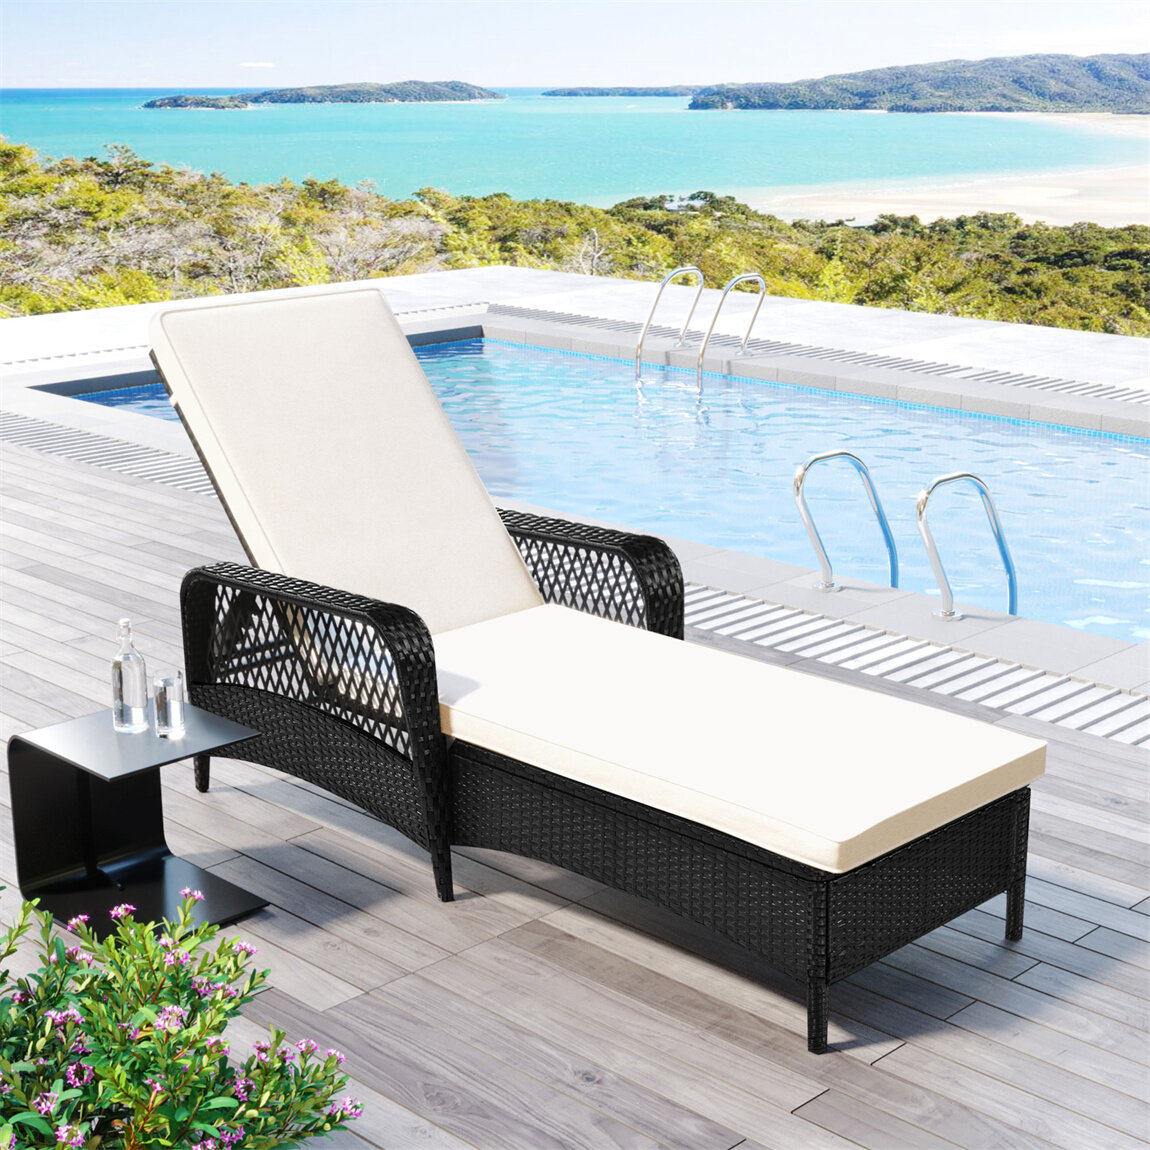 Details about   Adjustable Pool Chaise Lounge Chair Outdoor Patio Furniture PE Wicker W/Cushion 